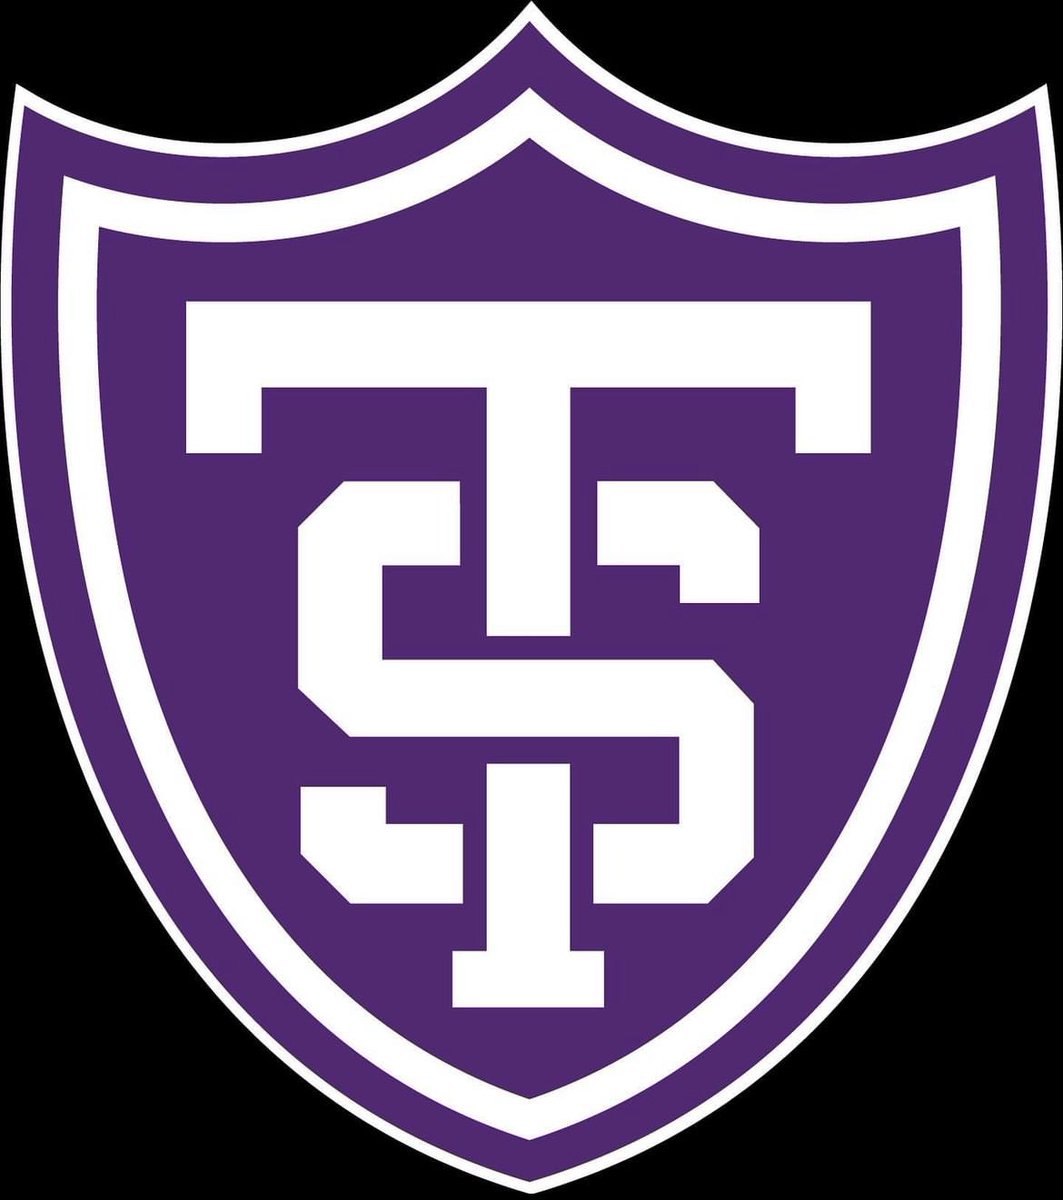 I’m proud to announce my commitment to play hockey at the University of St. Thomas. I’d like to thank God, Family, Friends, Coaches and everyone who has helped me along the way